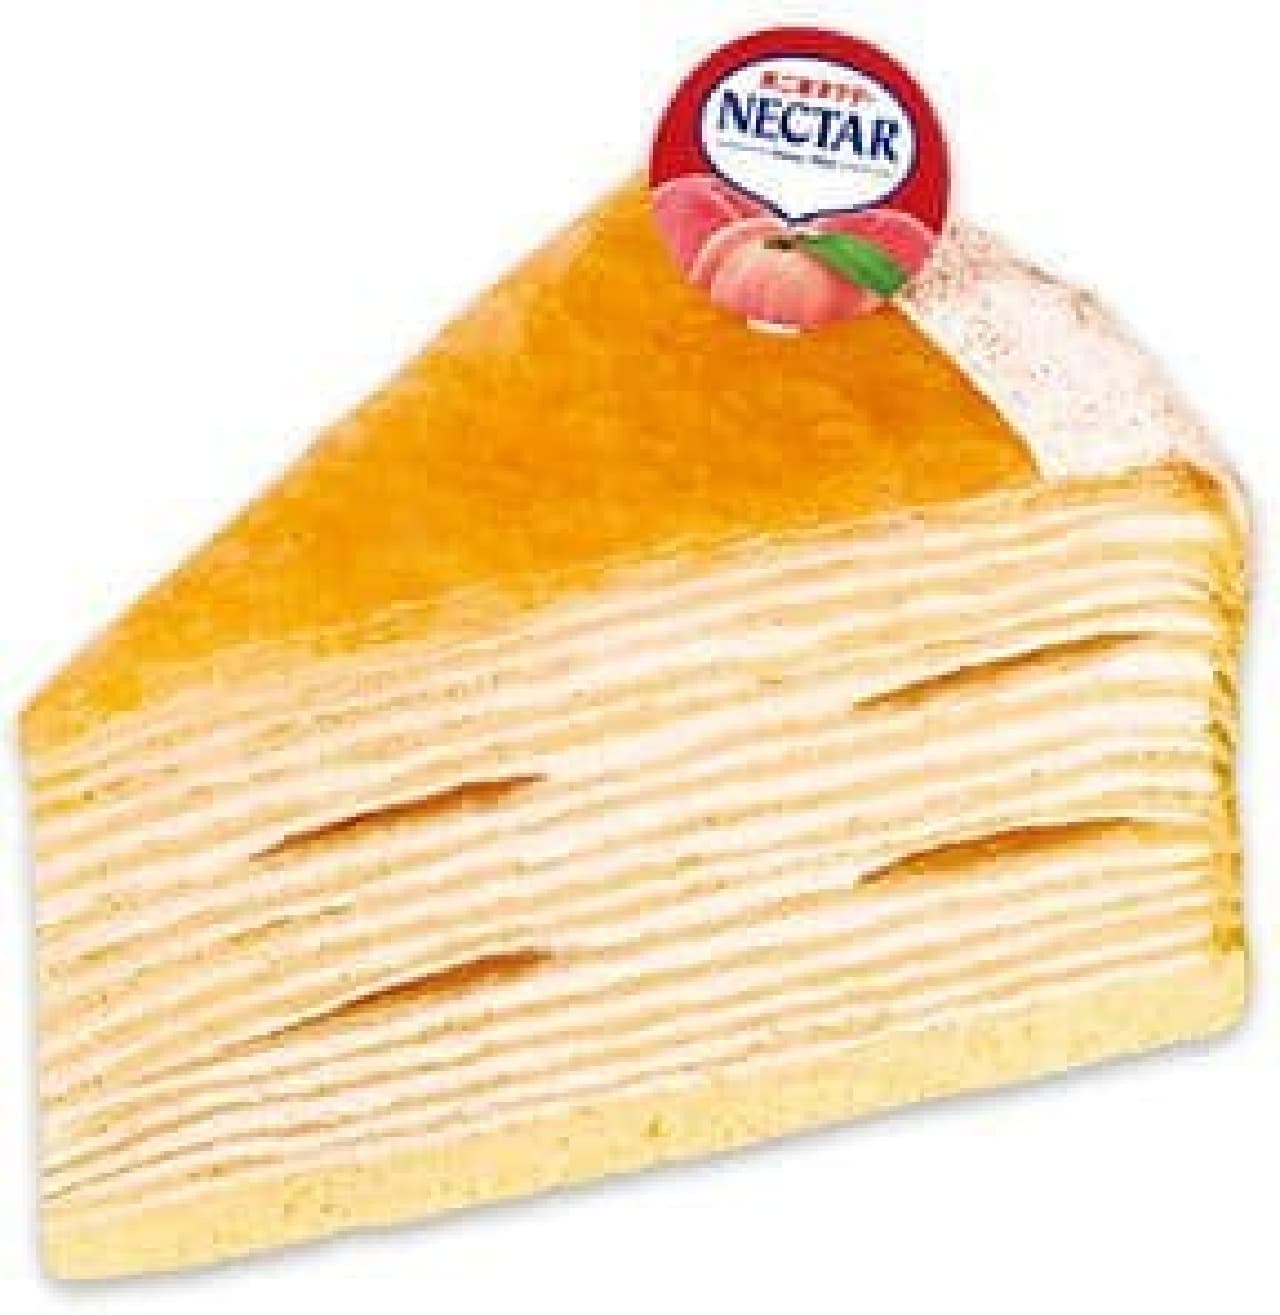 Fujiya pastry shop "Nectar Peach Mille Crepes"